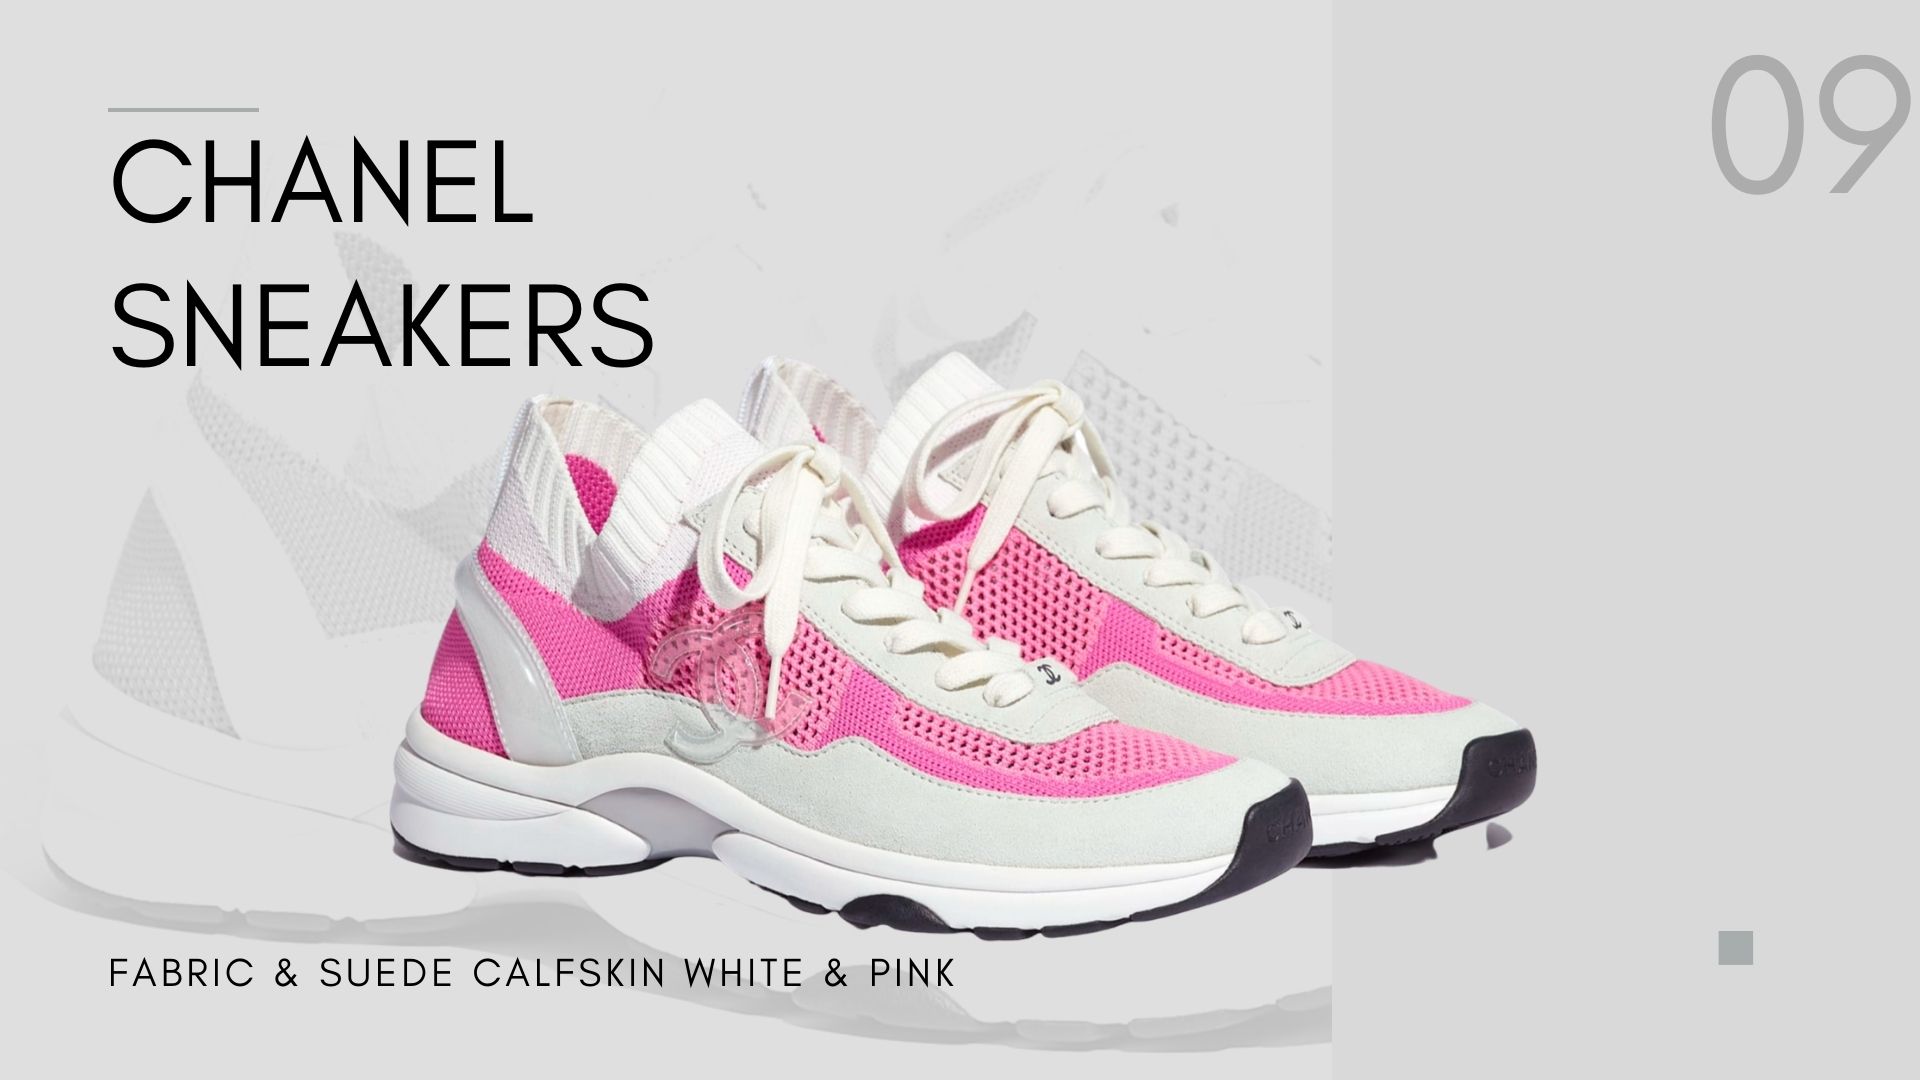 Sneakers Fabric & Suede Calfskin White & Pink